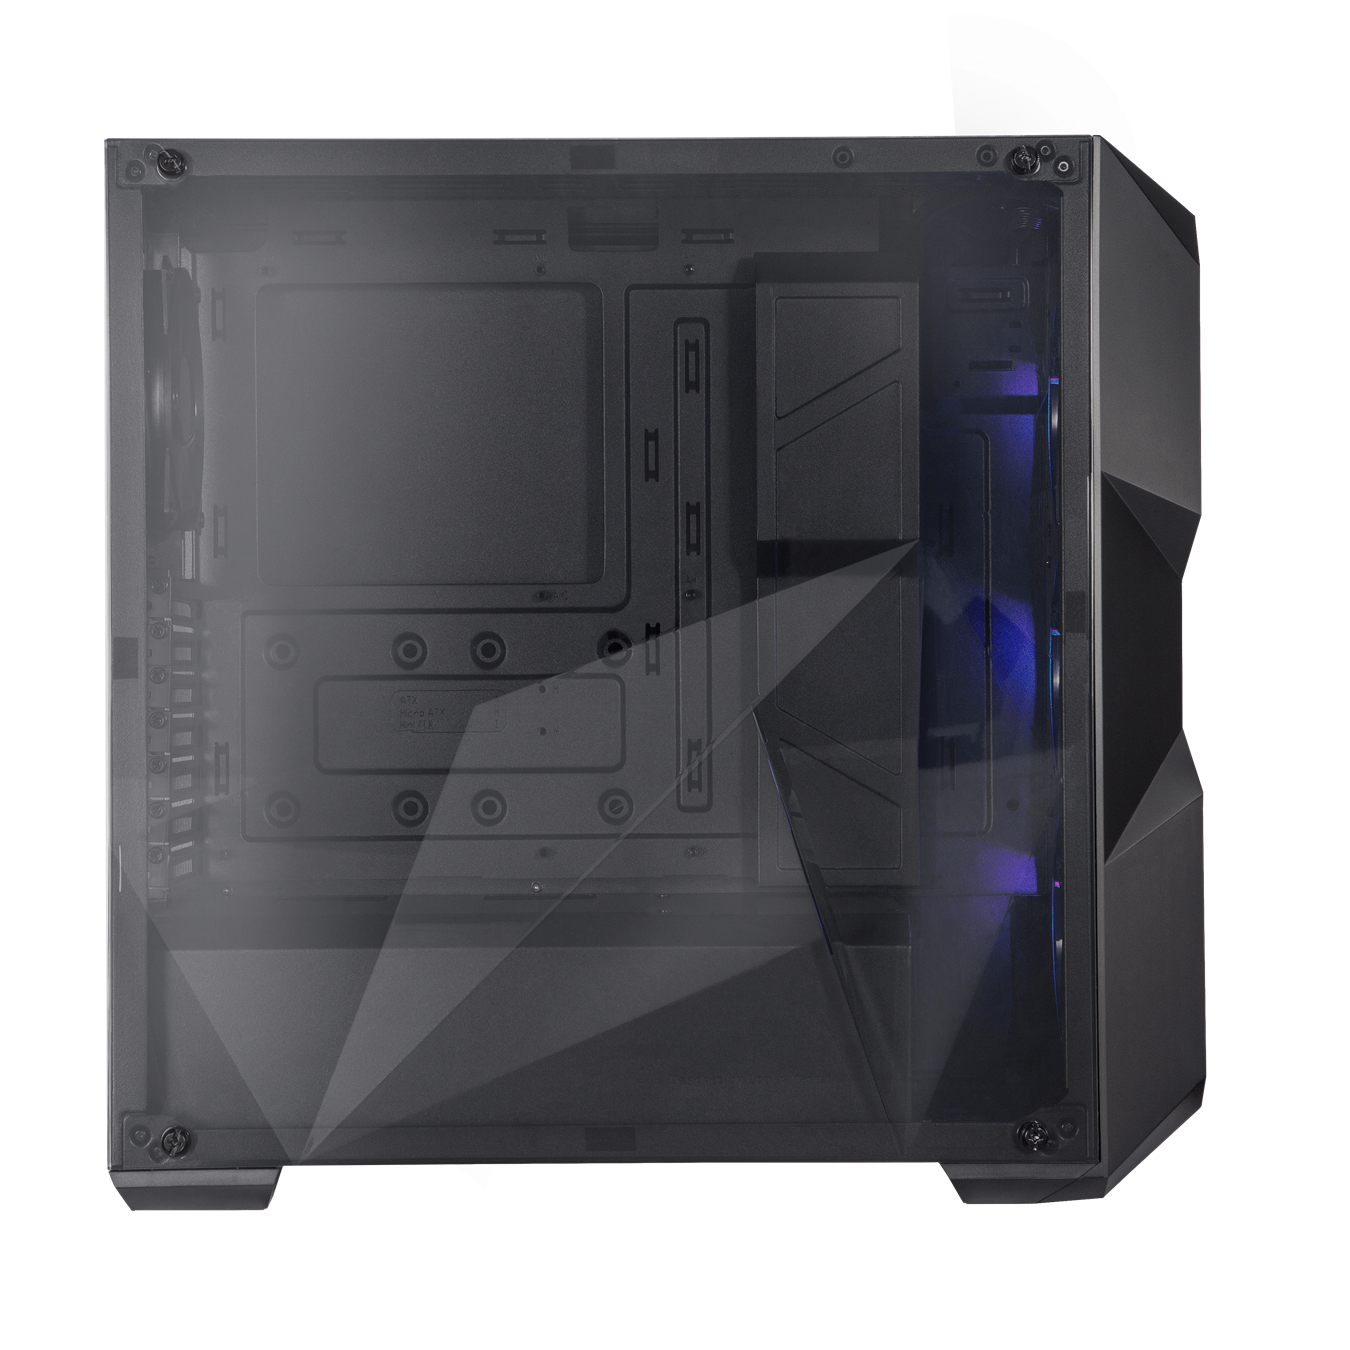 MasterBox TD500 ARGB - The front and side panels feature a three-dimensional, crystalline design that refracts light differently depending on the viewing angle